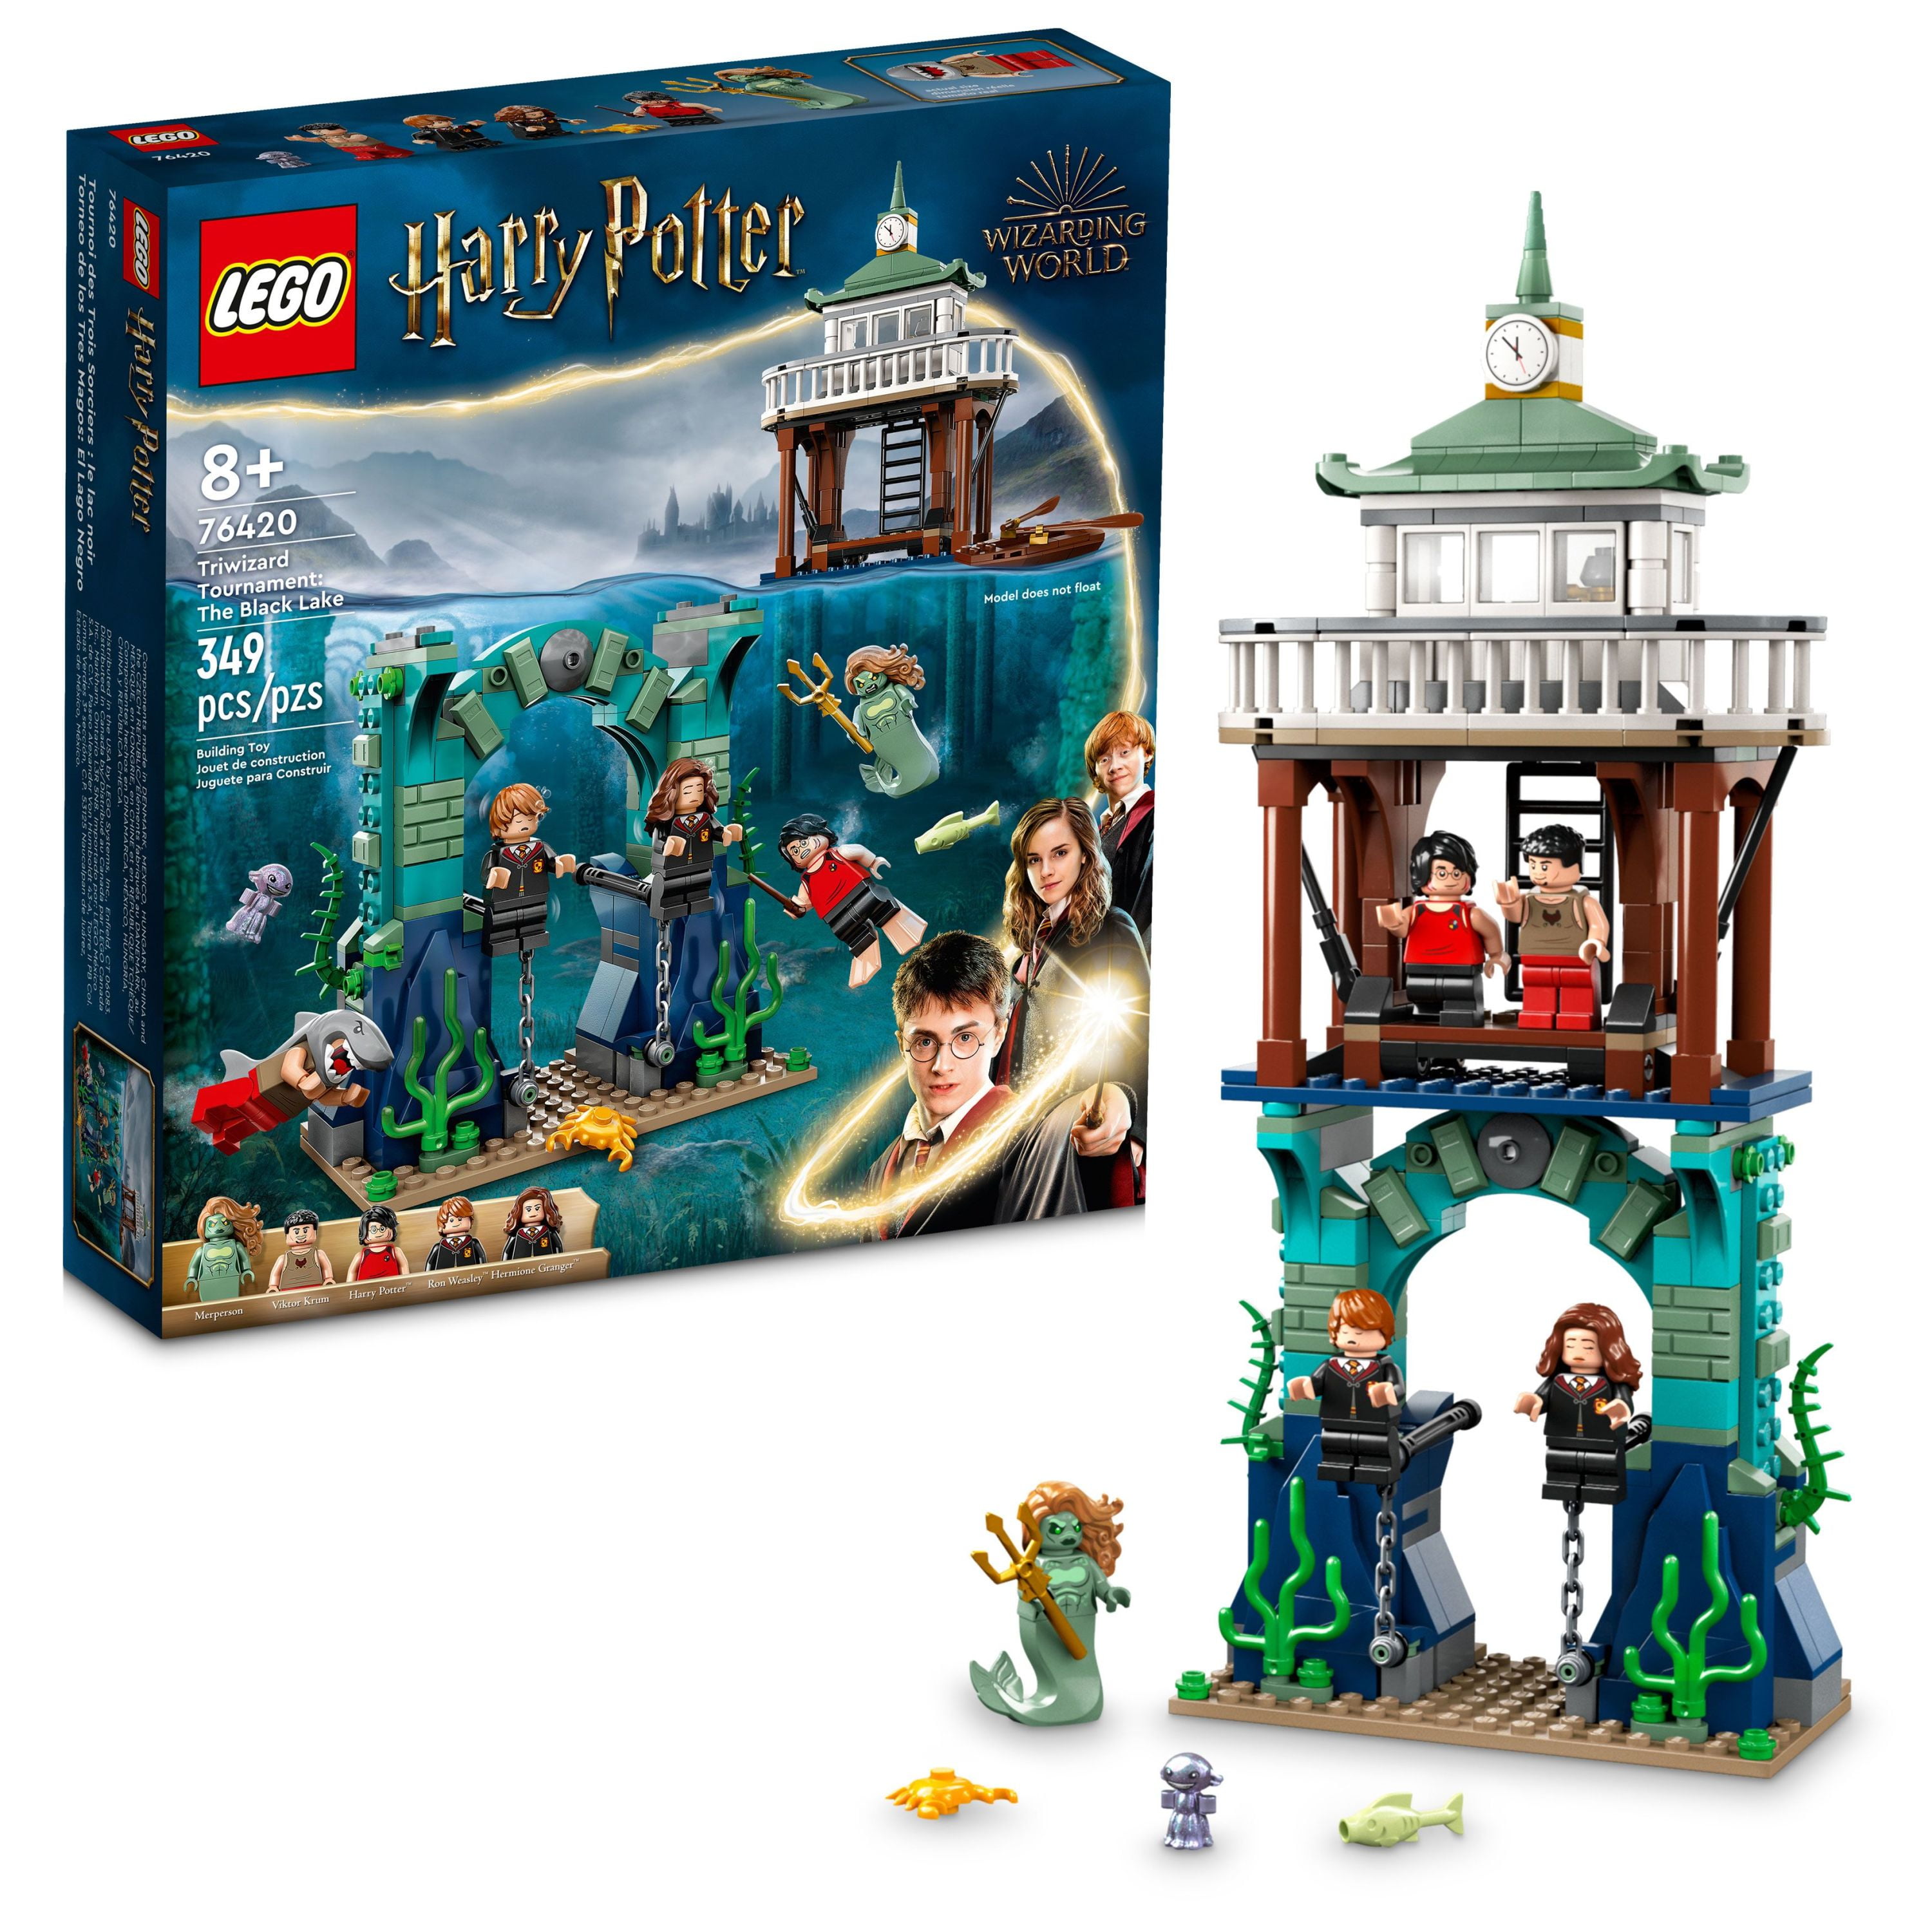 Swipe lån Godkendelse LEGO Harry Potter Triwizard Tournament: The Black Lake Building Set 76420 -  Goblet of Fire Toy Playset with Harry, Hermione, and Ron Minifigures,  Magical Collection Set for Kids, Boys & Girls - Walmart.com